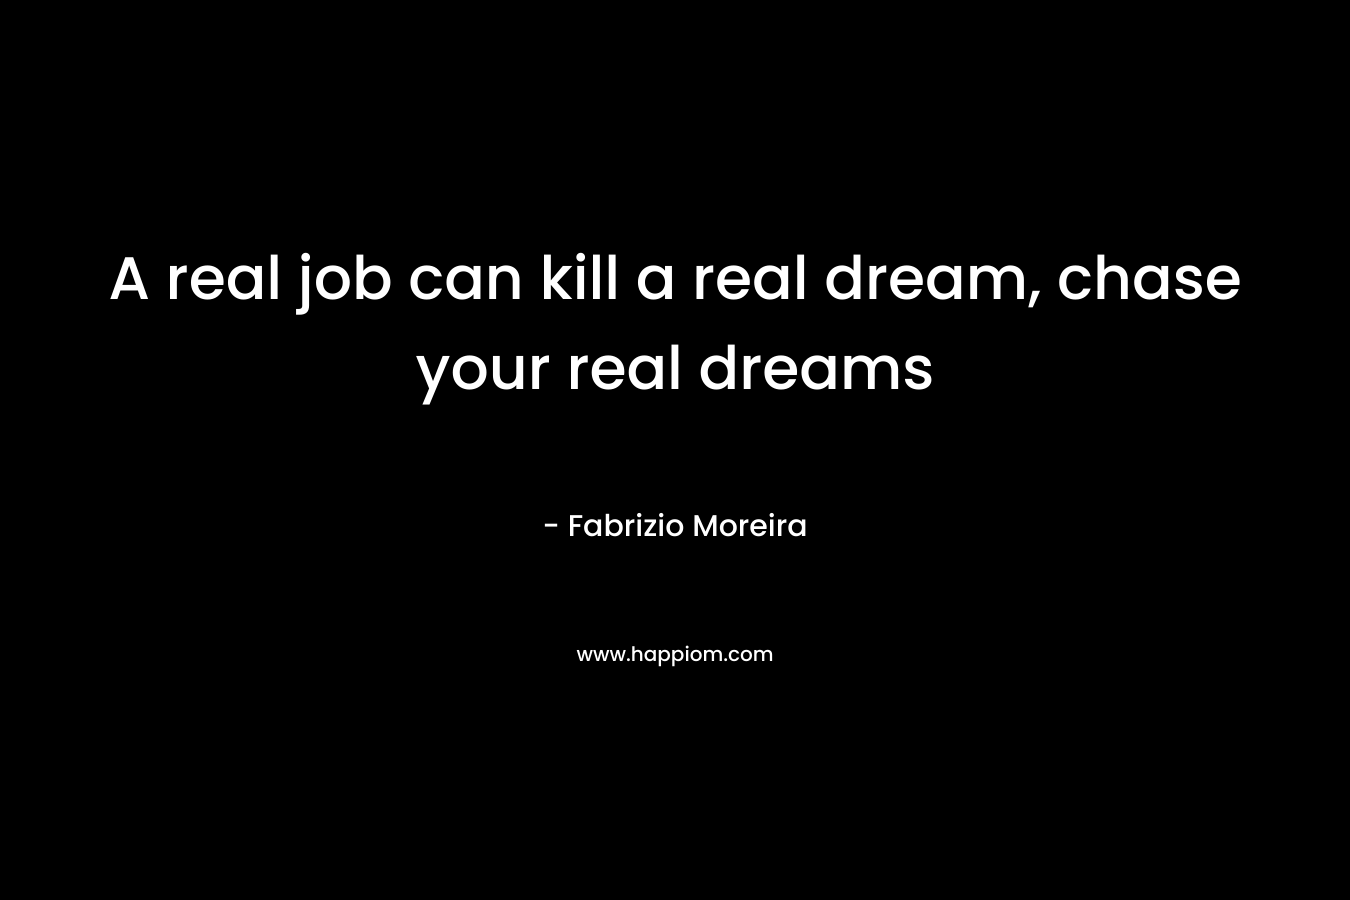 A real job can kill a real dream, chase your real dreams – Fabrizio Moreira